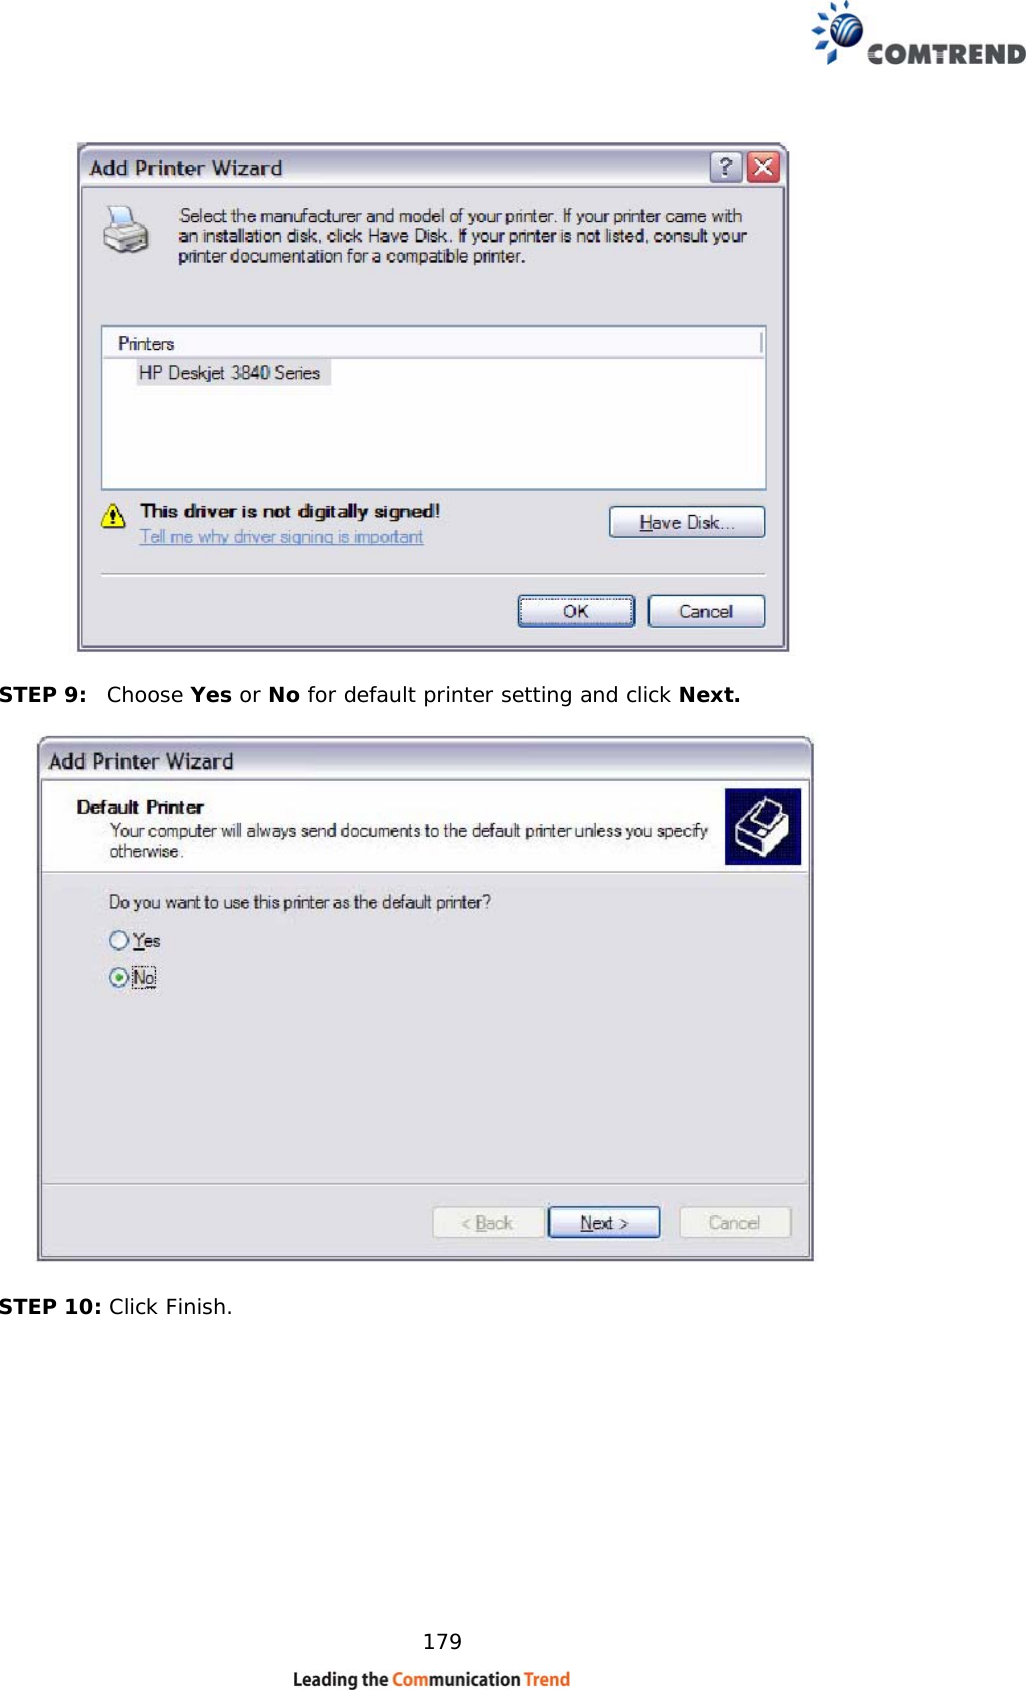    179   STEP 9:  Choose Yes or No for default printer setting and click Next.    STEP 10: Click Finish.         